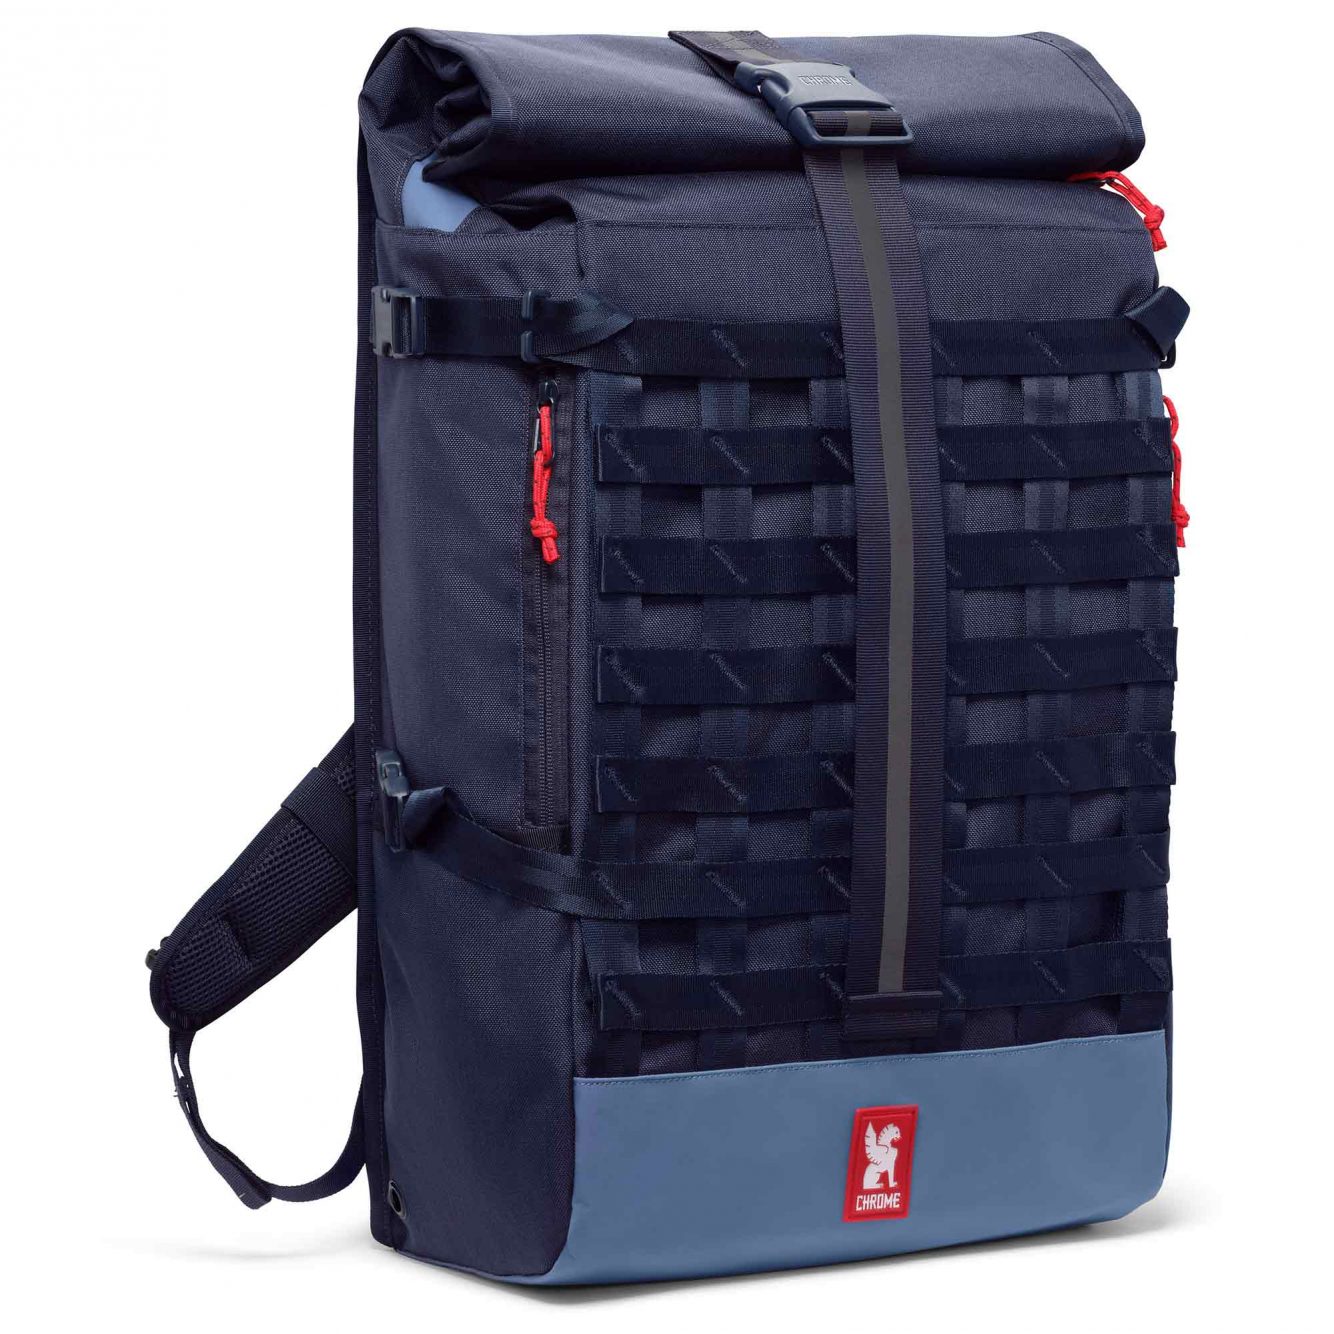 Bags in "navy tritone" are colour-coordinated with the early morning hours.